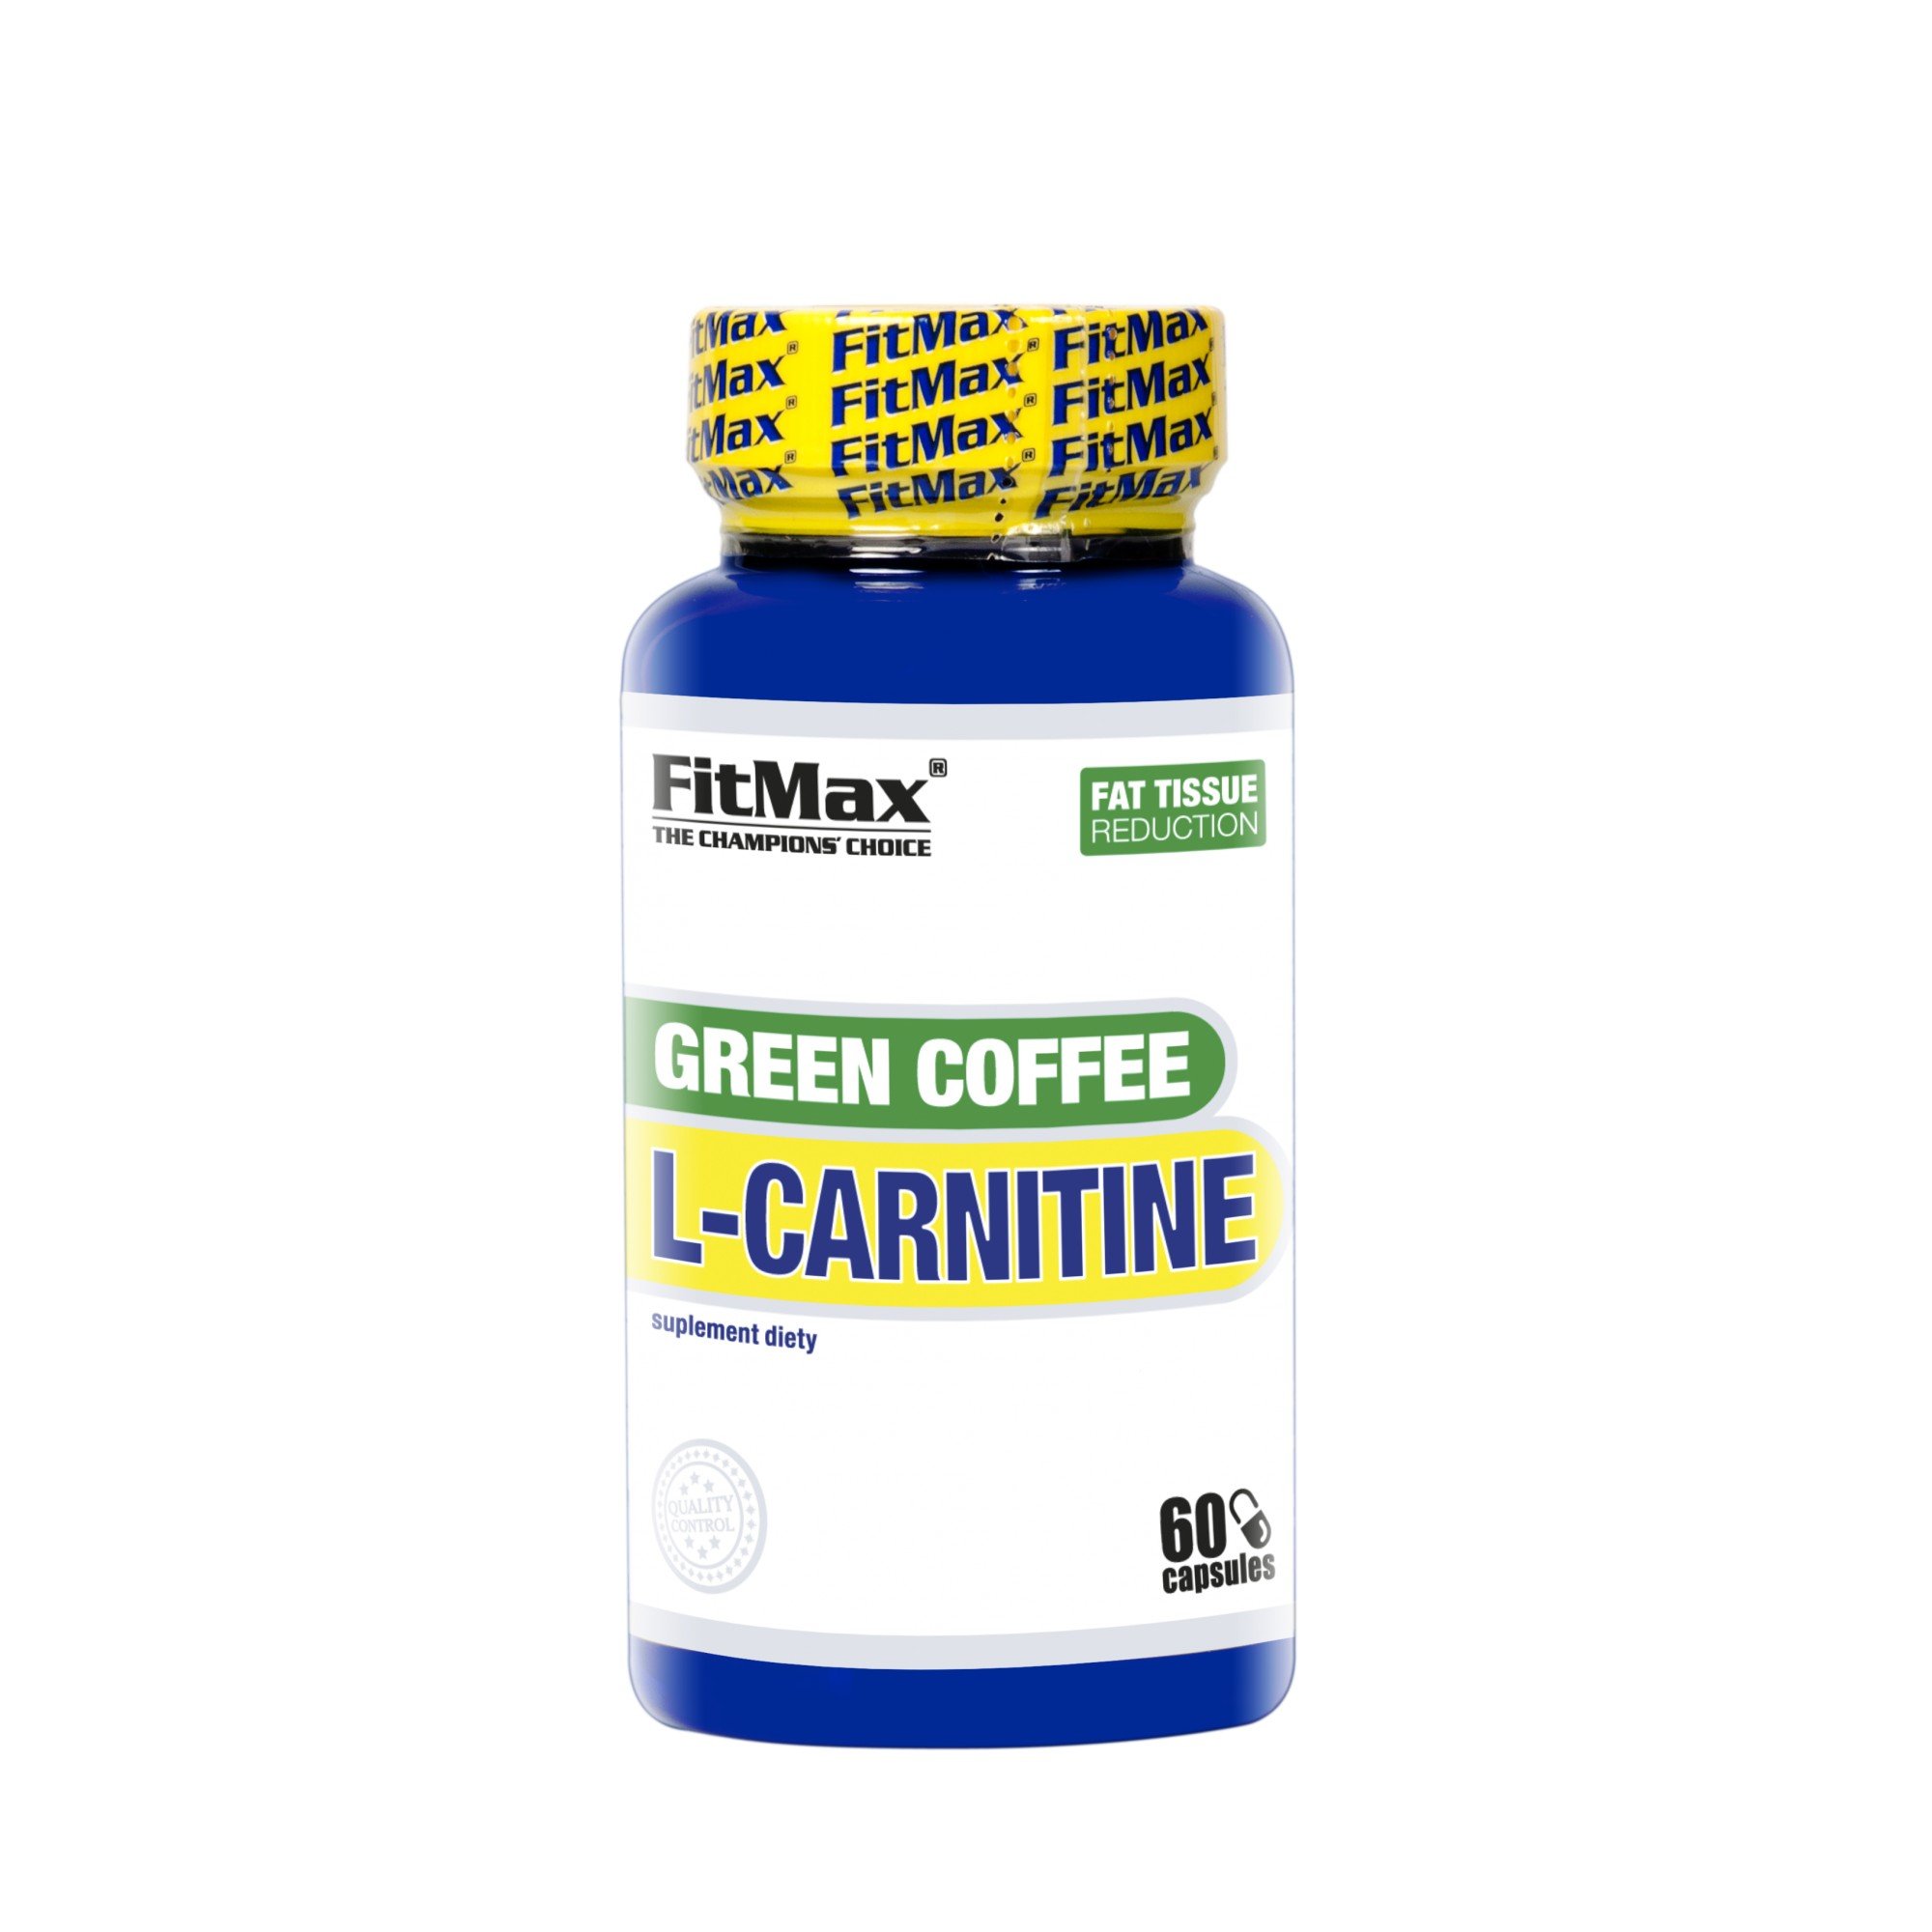 Green Cofee L-Carnitine, 60 pcs, FitMax. L-carnitine. Weight Loss General Health Detoxification Stress resistance Lowering cholesterol Antioxidant properties 